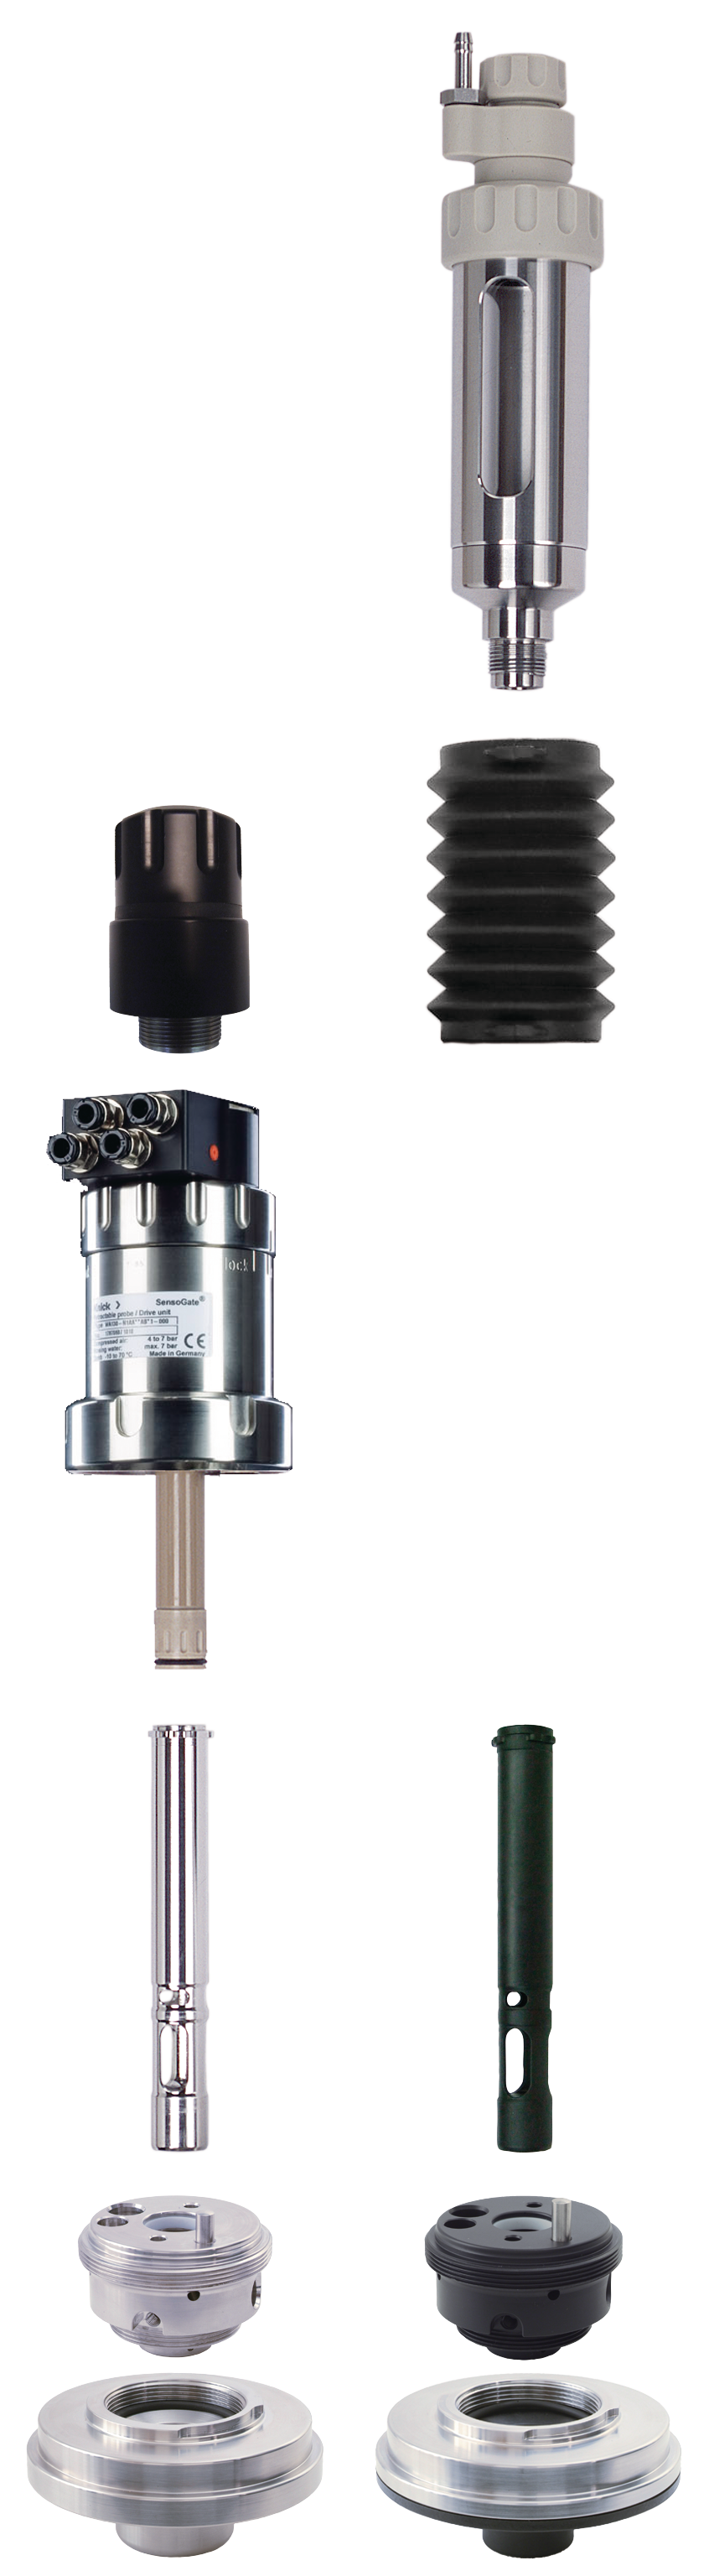 WA131 SensoGate Retractable Fitting | Modular | Pneumatic | For simple, commercial controllers